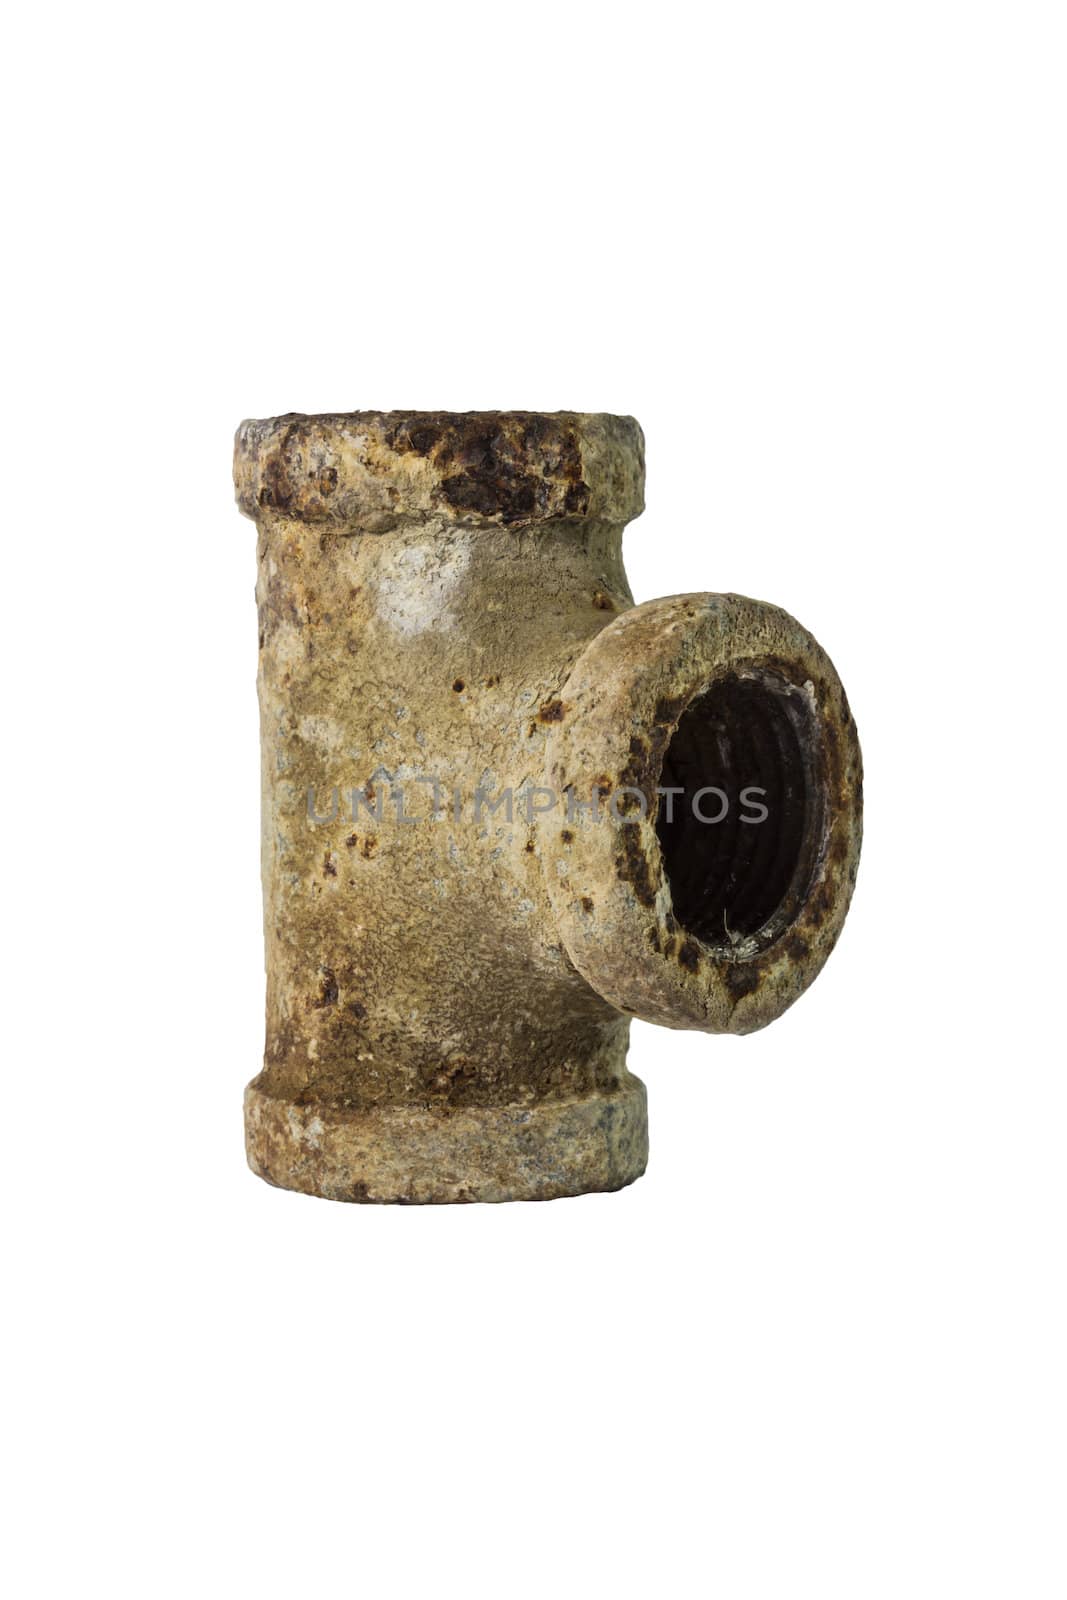 old drainpipe three way ,Isolated on white background